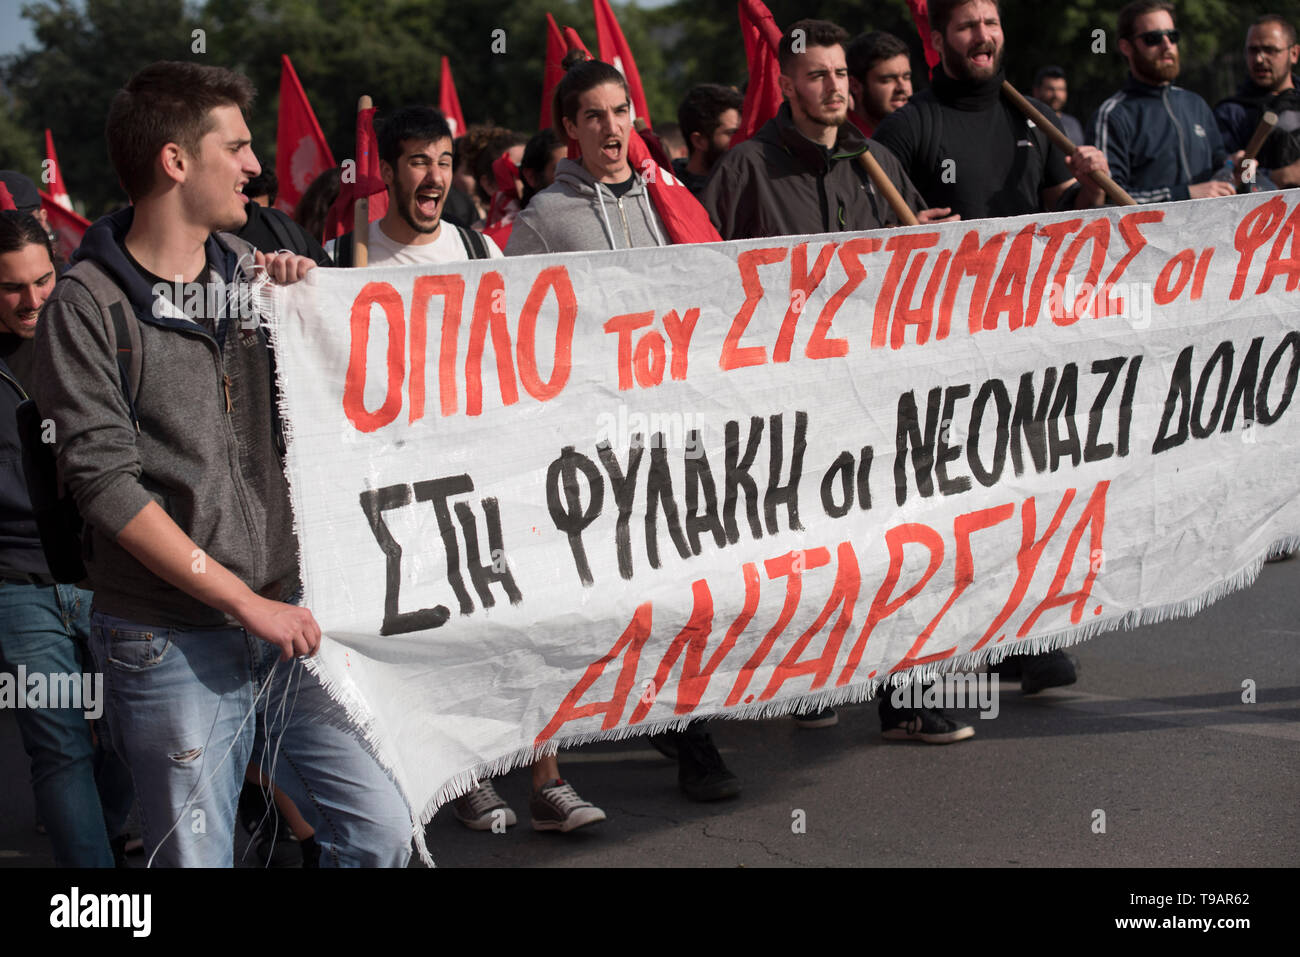 Athens, Greece. 17th May, 2019. Leftists and antifascists shout slogans against fascism and Golden Dawn, the Greek neo-nazi party. A demonstration was staged at Kolonos area, central Athens, where I. Kassidiaris, Golden Dawn MP and candidate for Athens Mayor in the upcoming municipal elections, was to address party supporters. Credit: Nikolas Georgiou/Alamy Live News Stock Photo